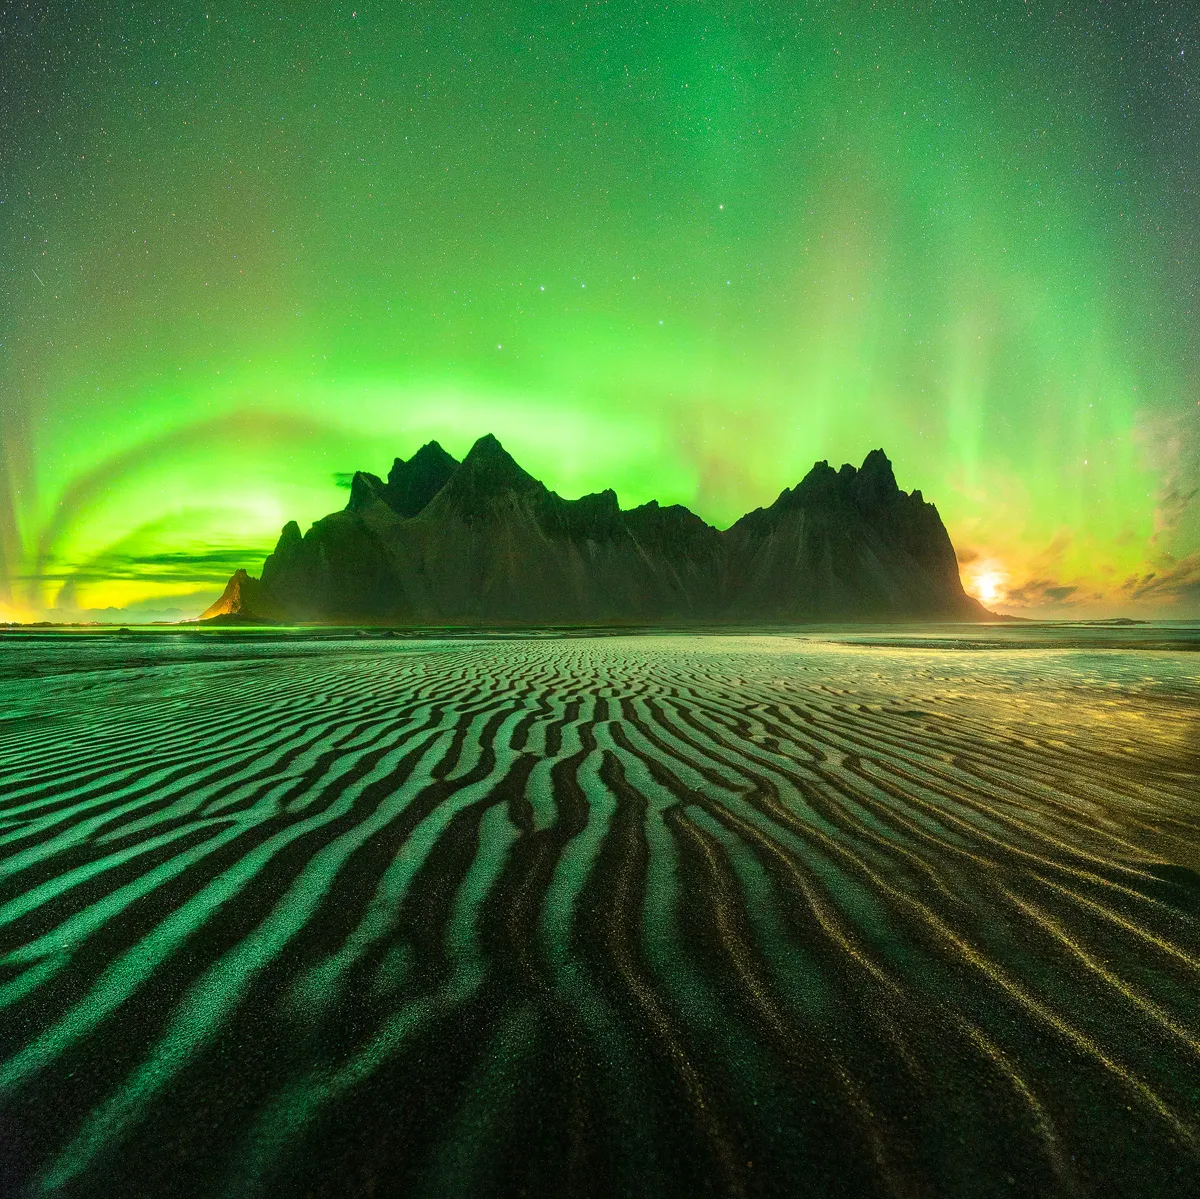 Emerald Roots, by Lorenzo Ranieri Tenti, Vestrahorn, Stokksnes, Iceland. Category: Aurorae Equipment: Sony ILCE-7S camera, 14 mm f/2.8, ISO 6400, 25-second exposure; Foreground: 23 seconds, Aurora: 8 seconds